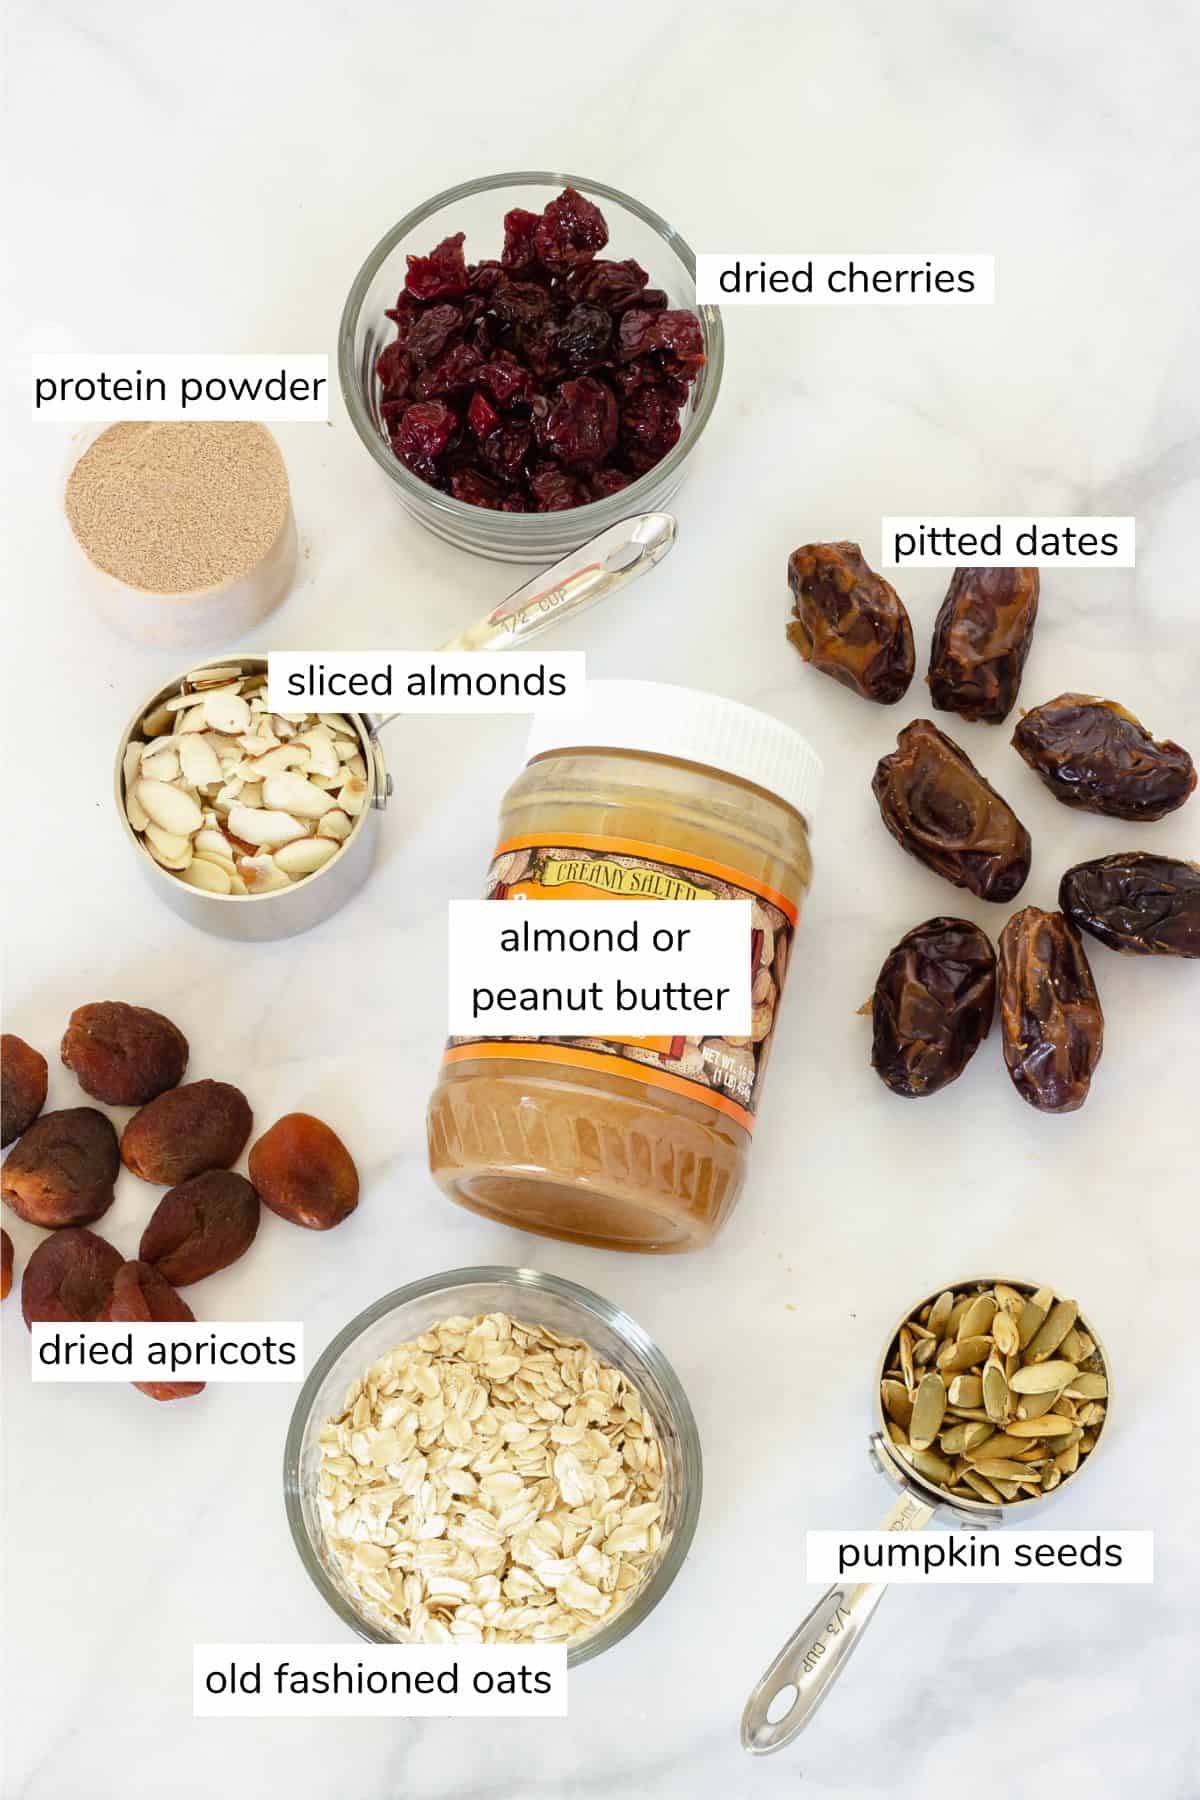 Ingredients for no bake fruit and nut bars.